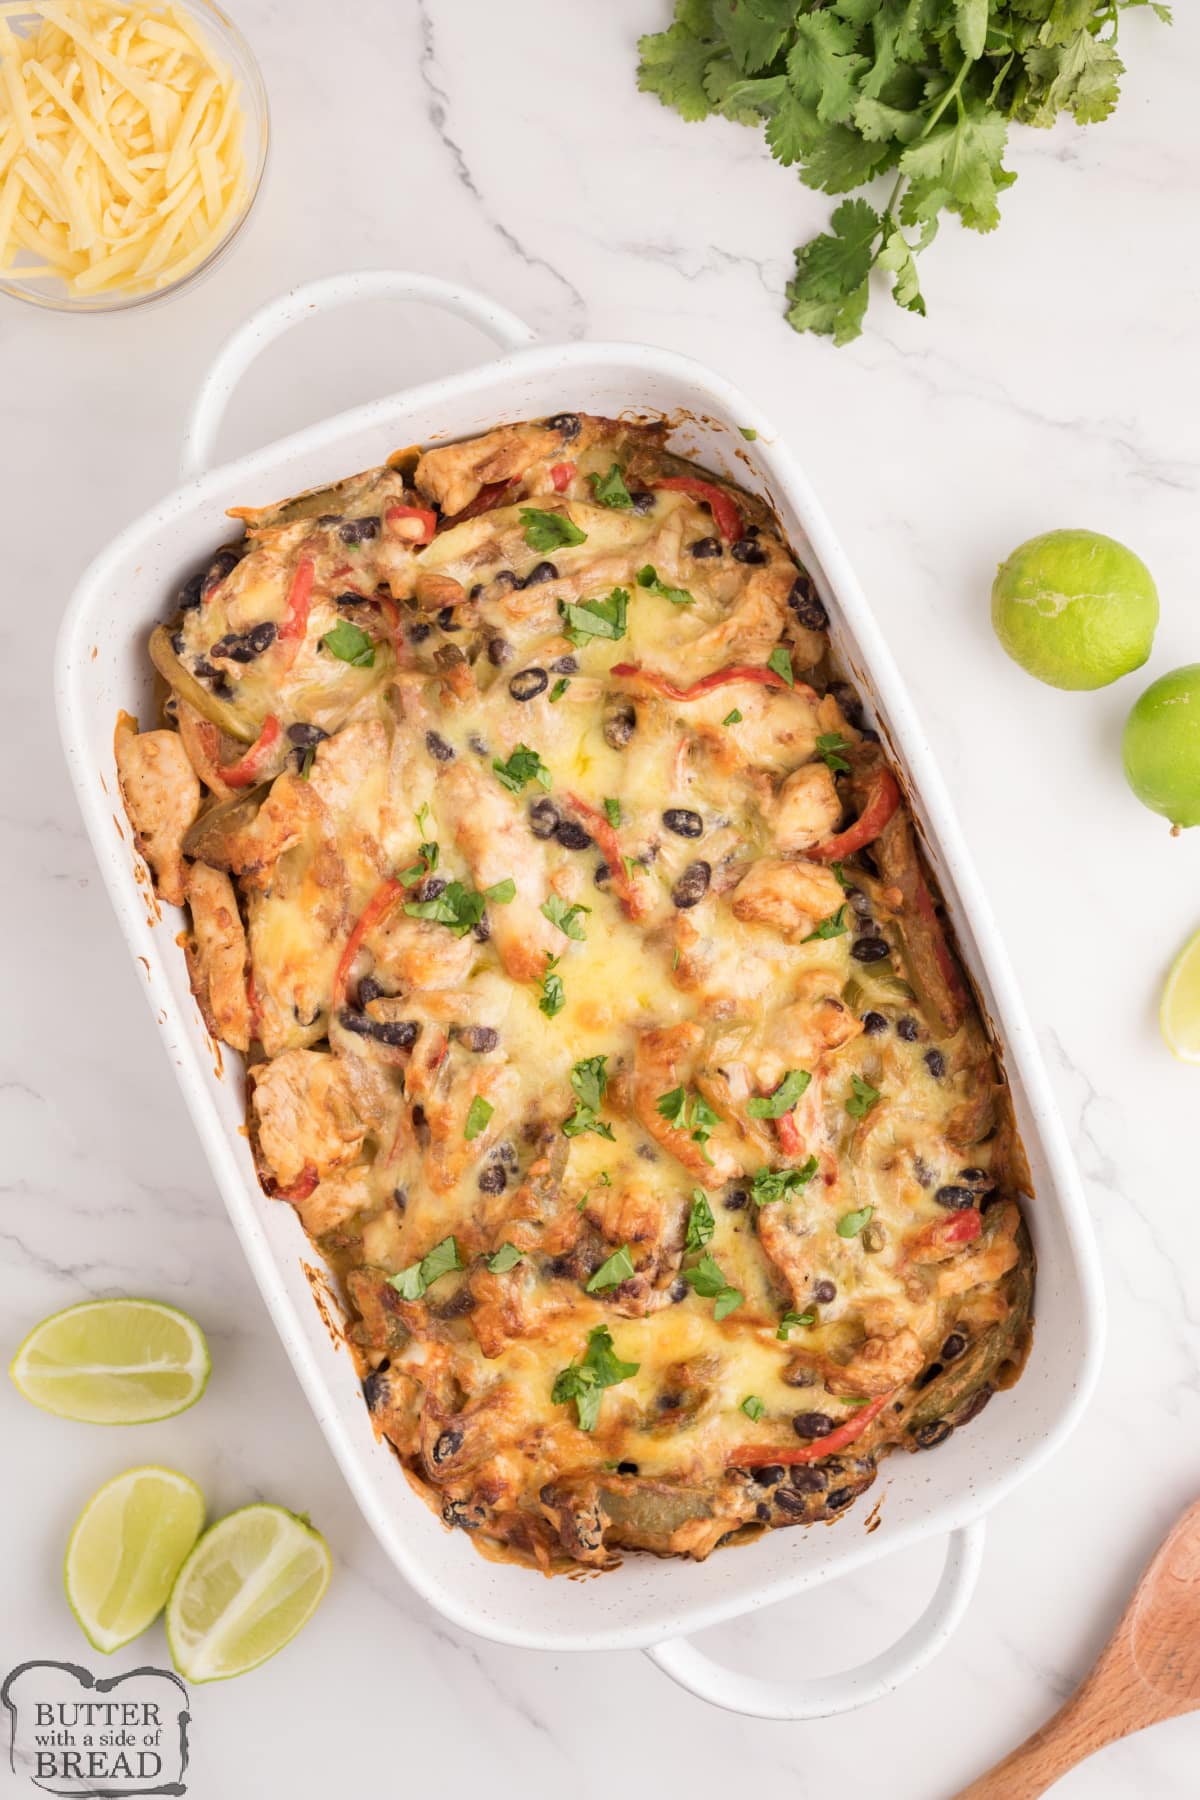 Casserole recipe with chicken, peppers, onions, black beans and cheese